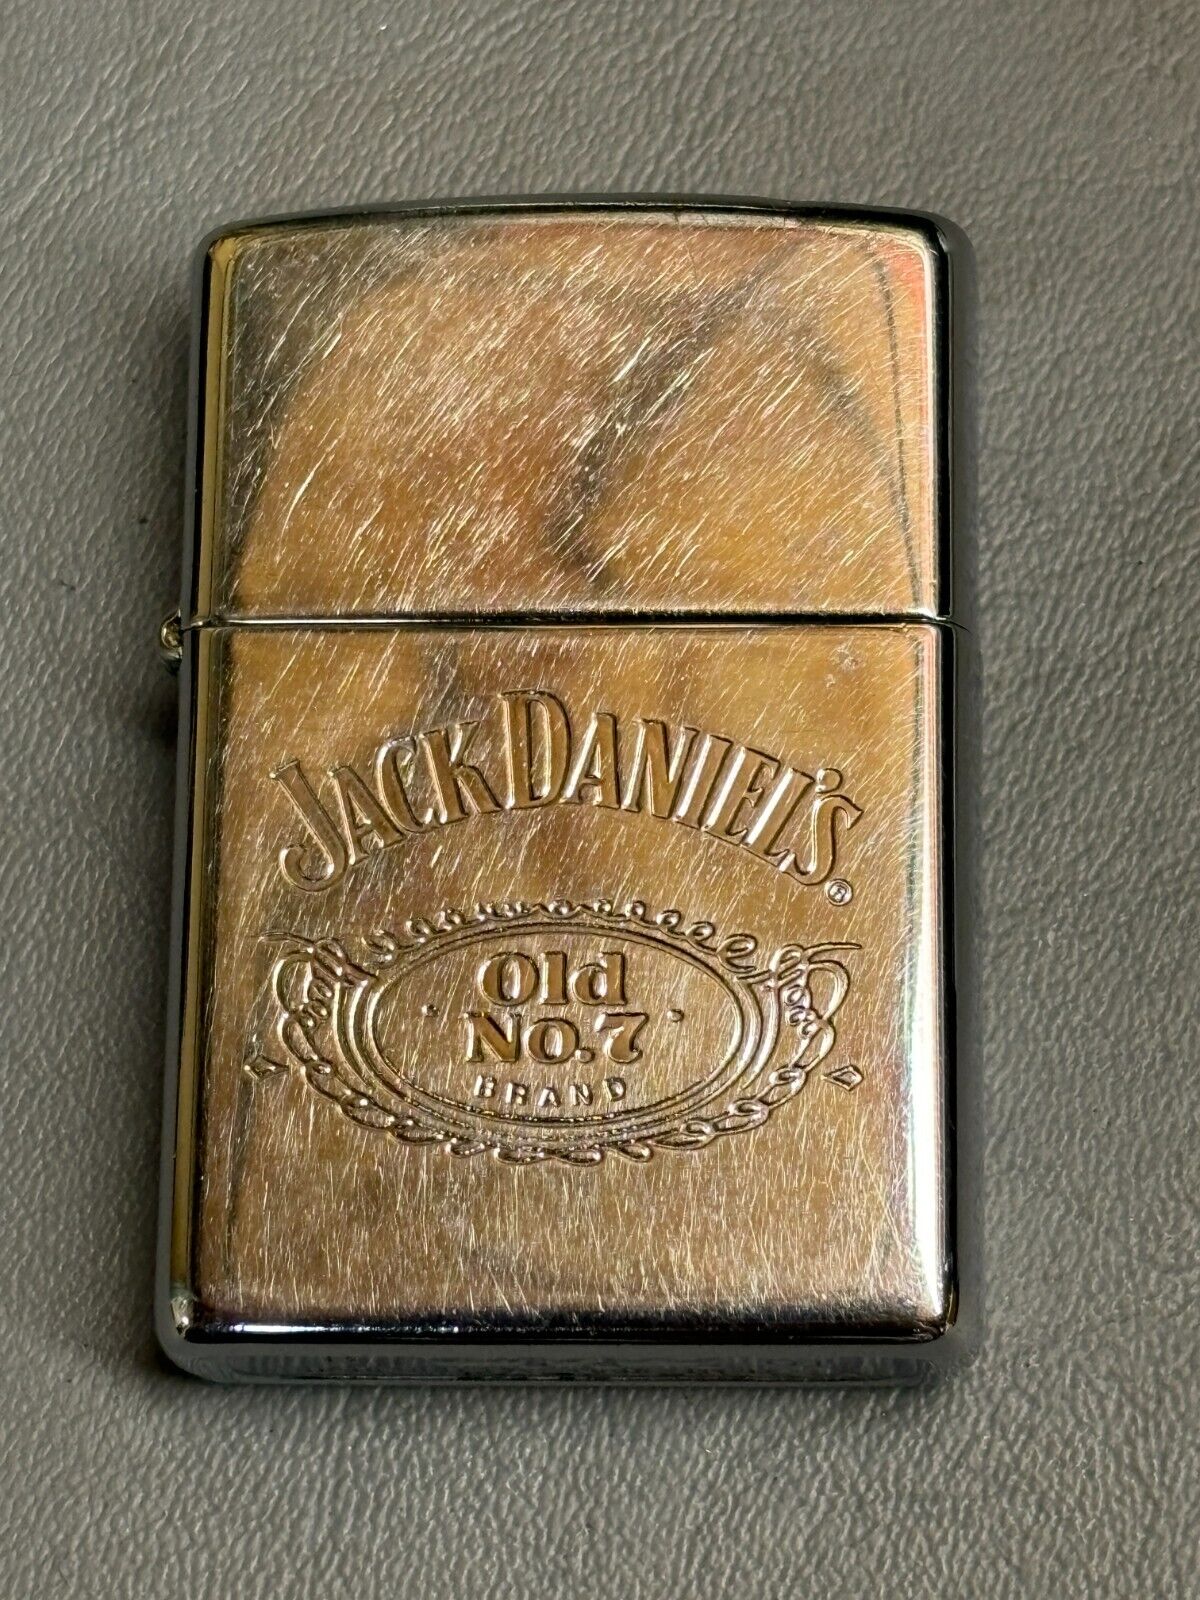 2001 Zippo Jack Daniels Old No. 7 Field Tester Lighter - Preowned - Fired